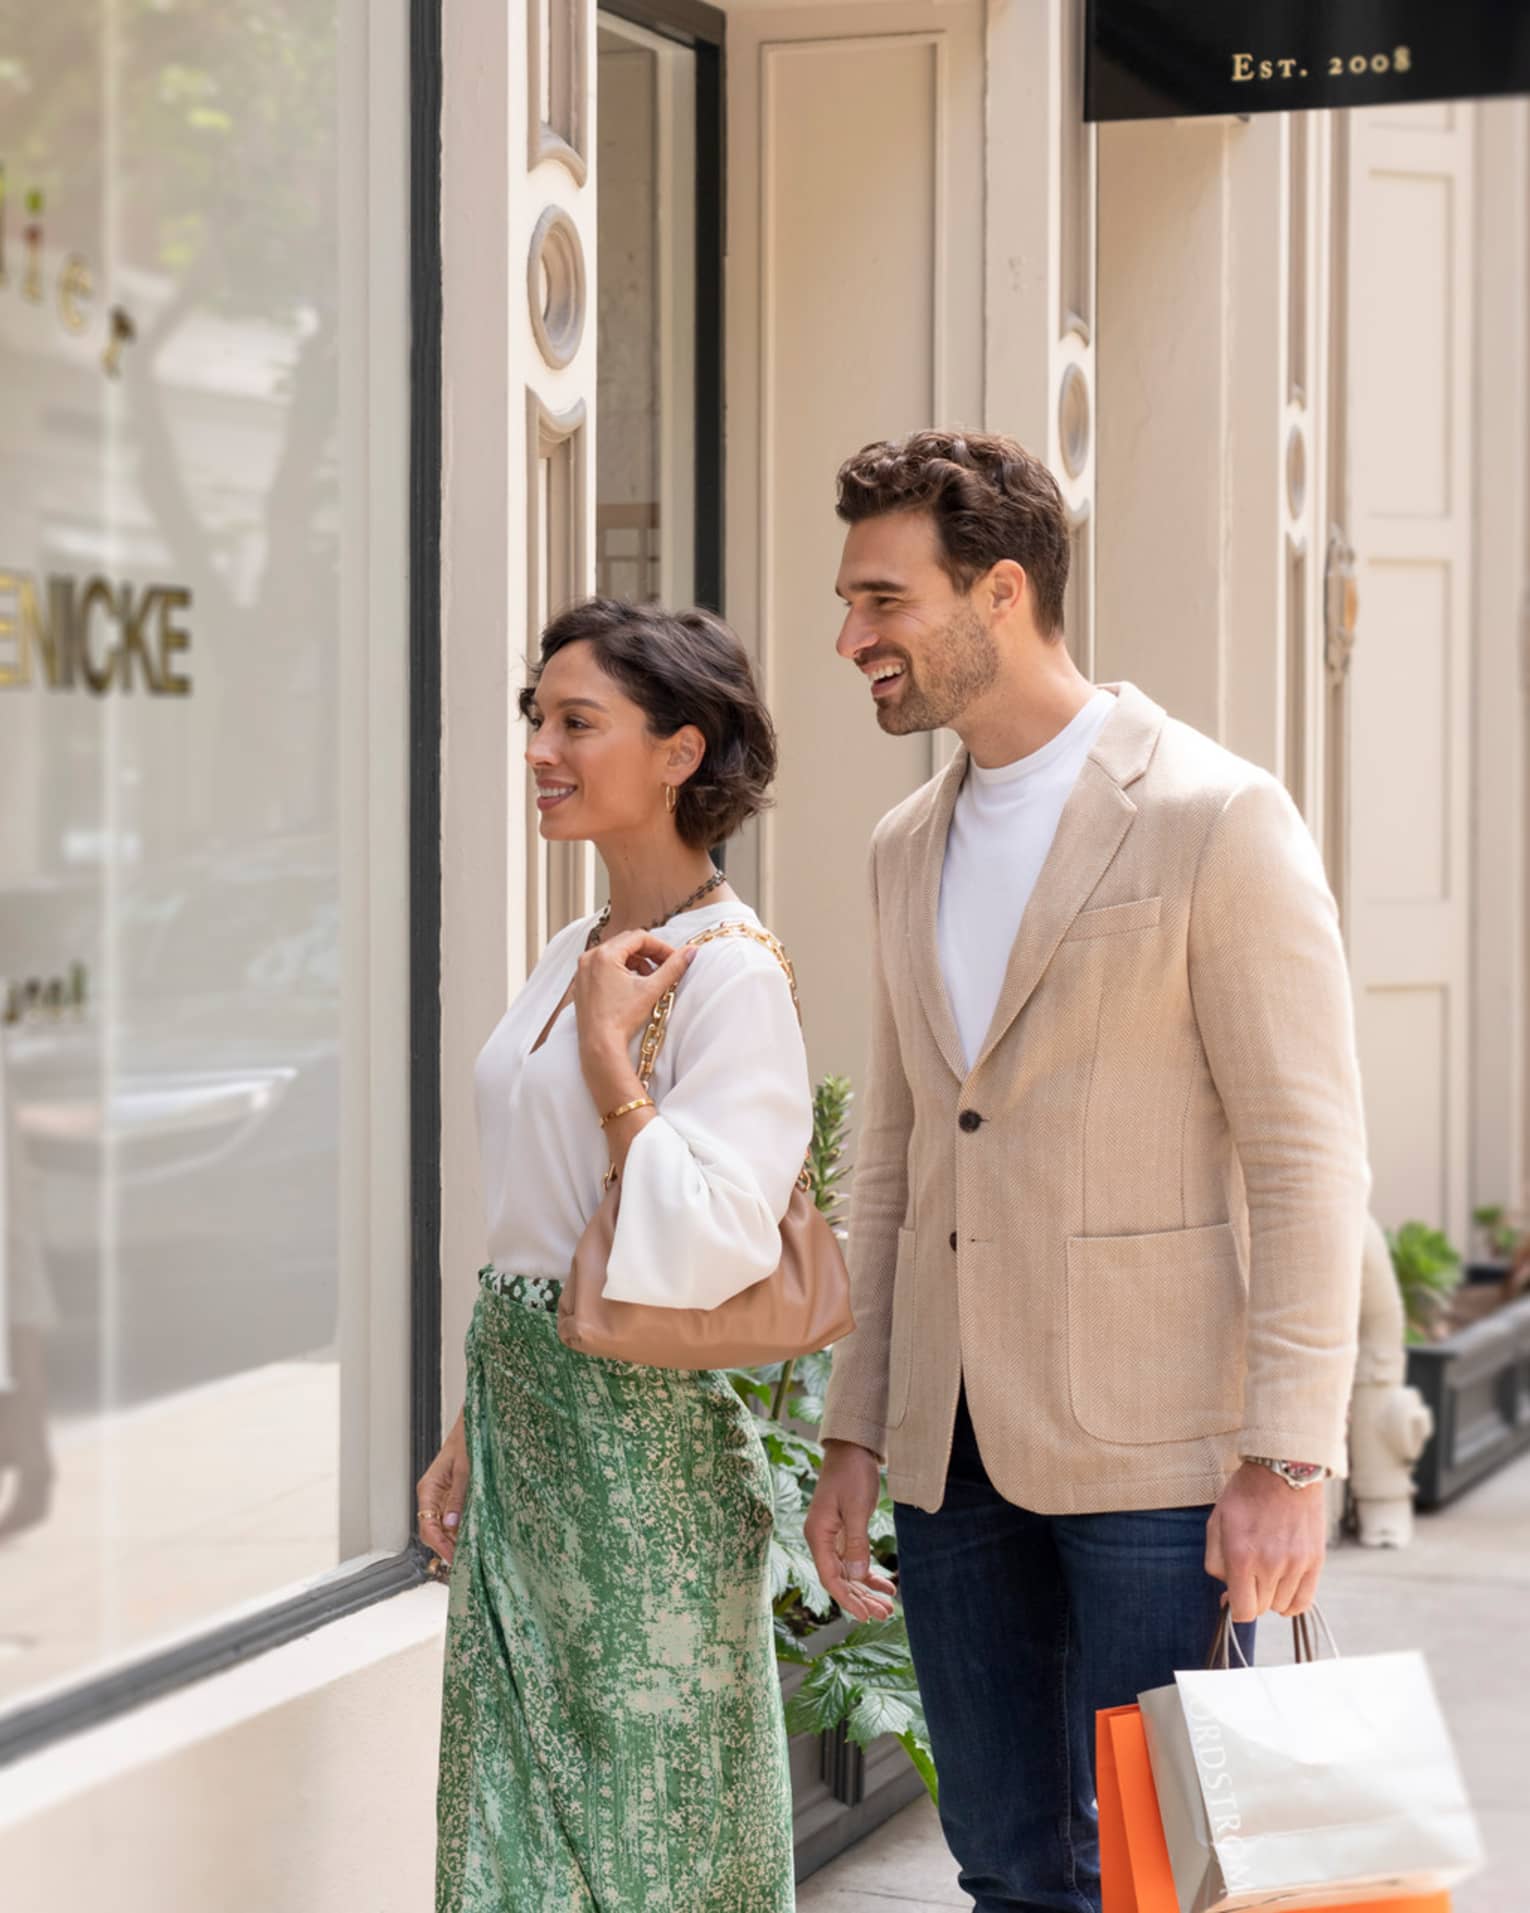 A couple admires a storefront together while shopping. 